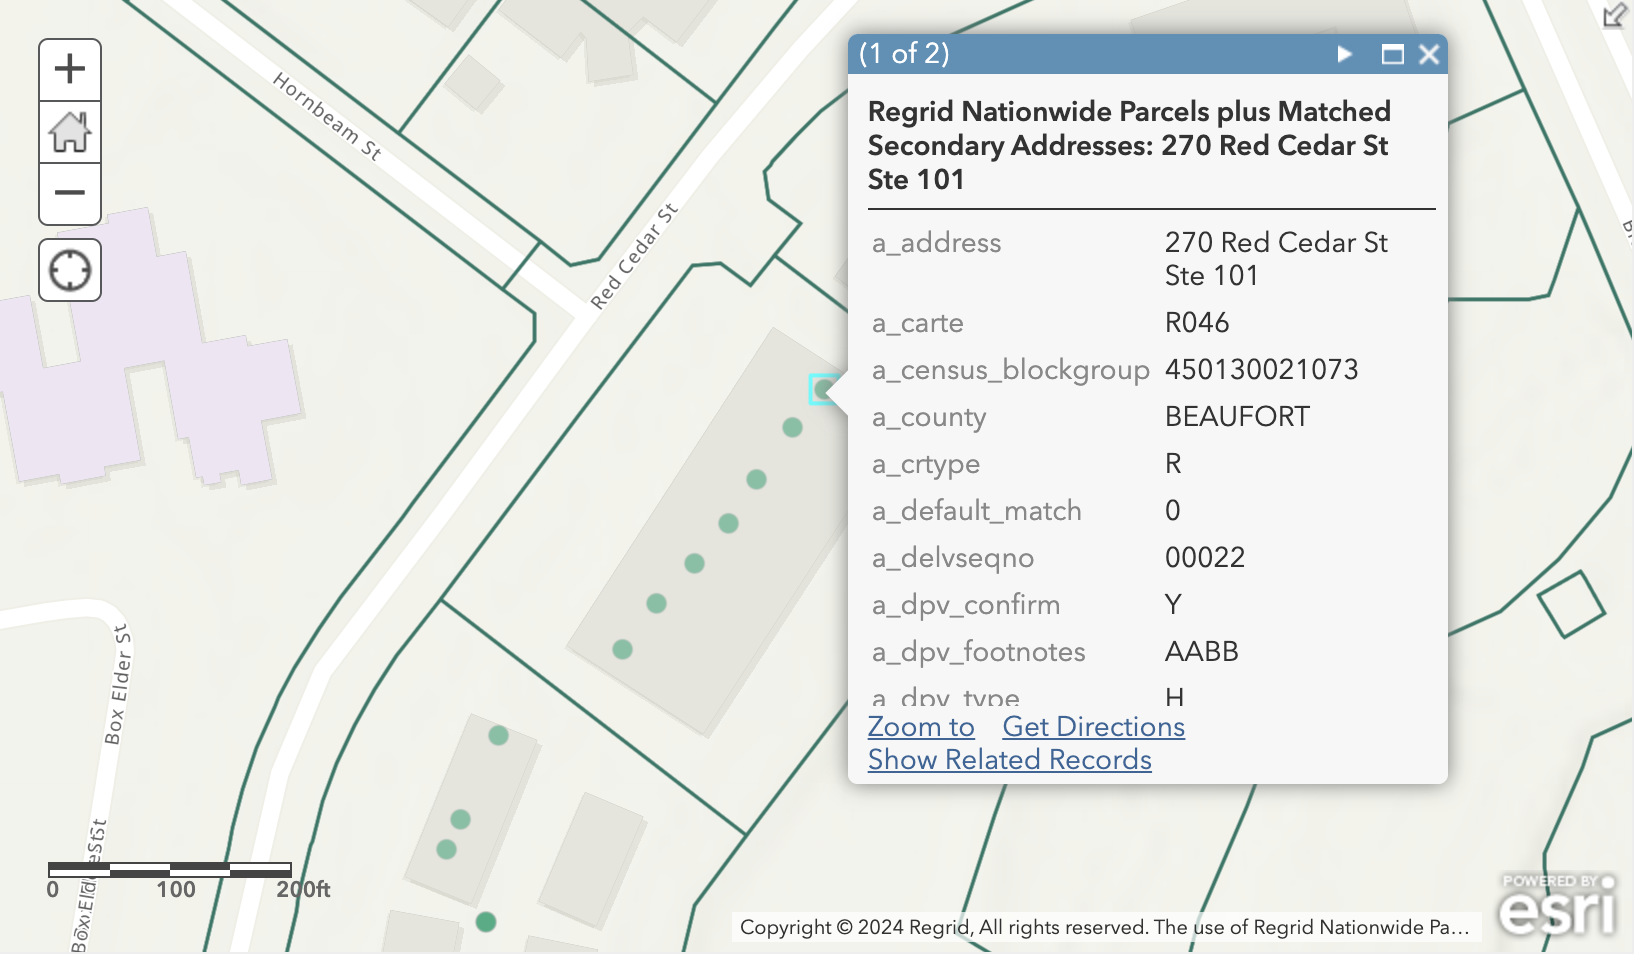 Matched Addresses is a spatial feature layer that includes a one-to-many relationship with parcels.